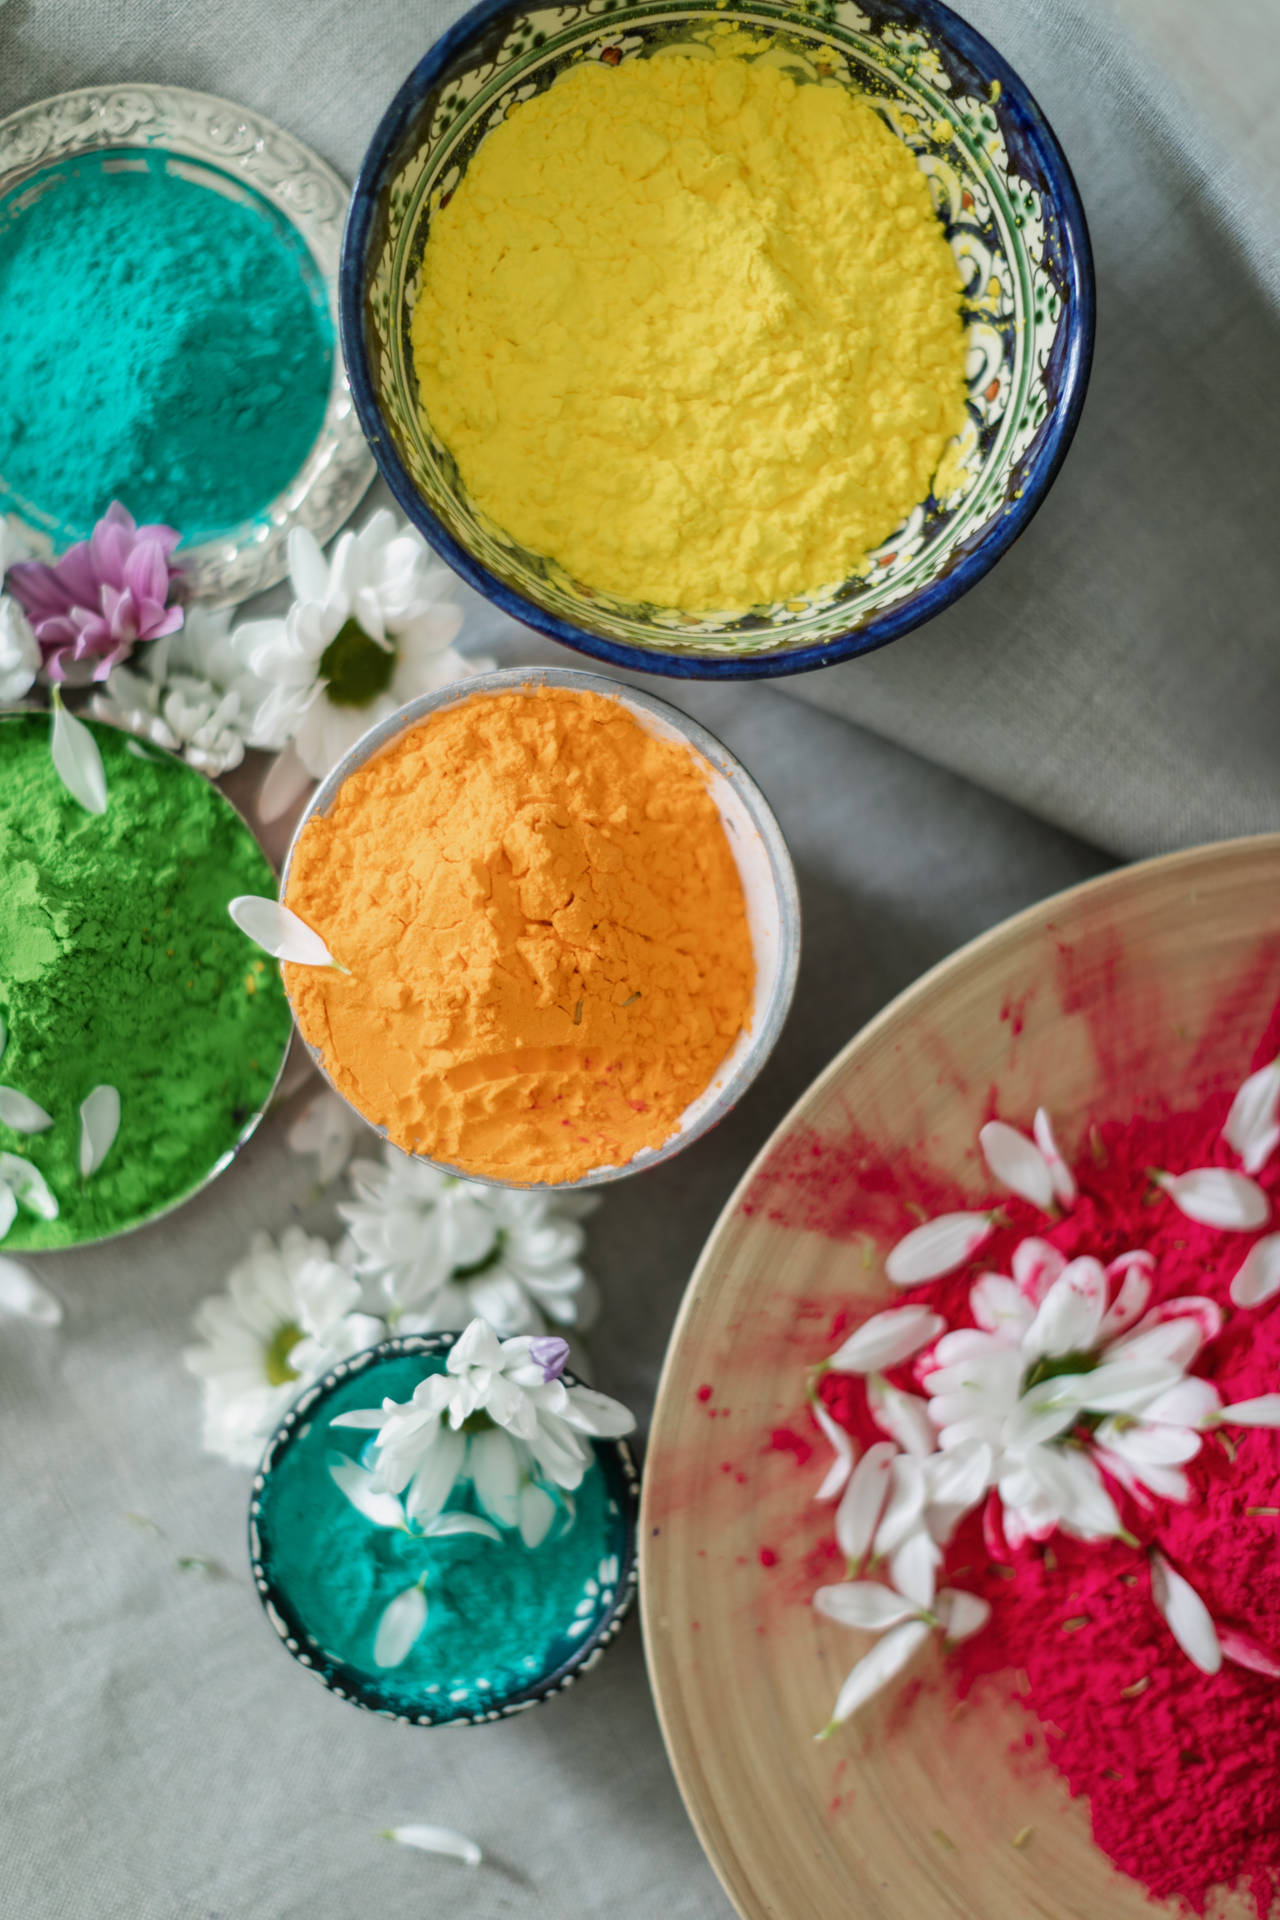 Colorful Holi Celebration With Hd Flowers And Powders Background